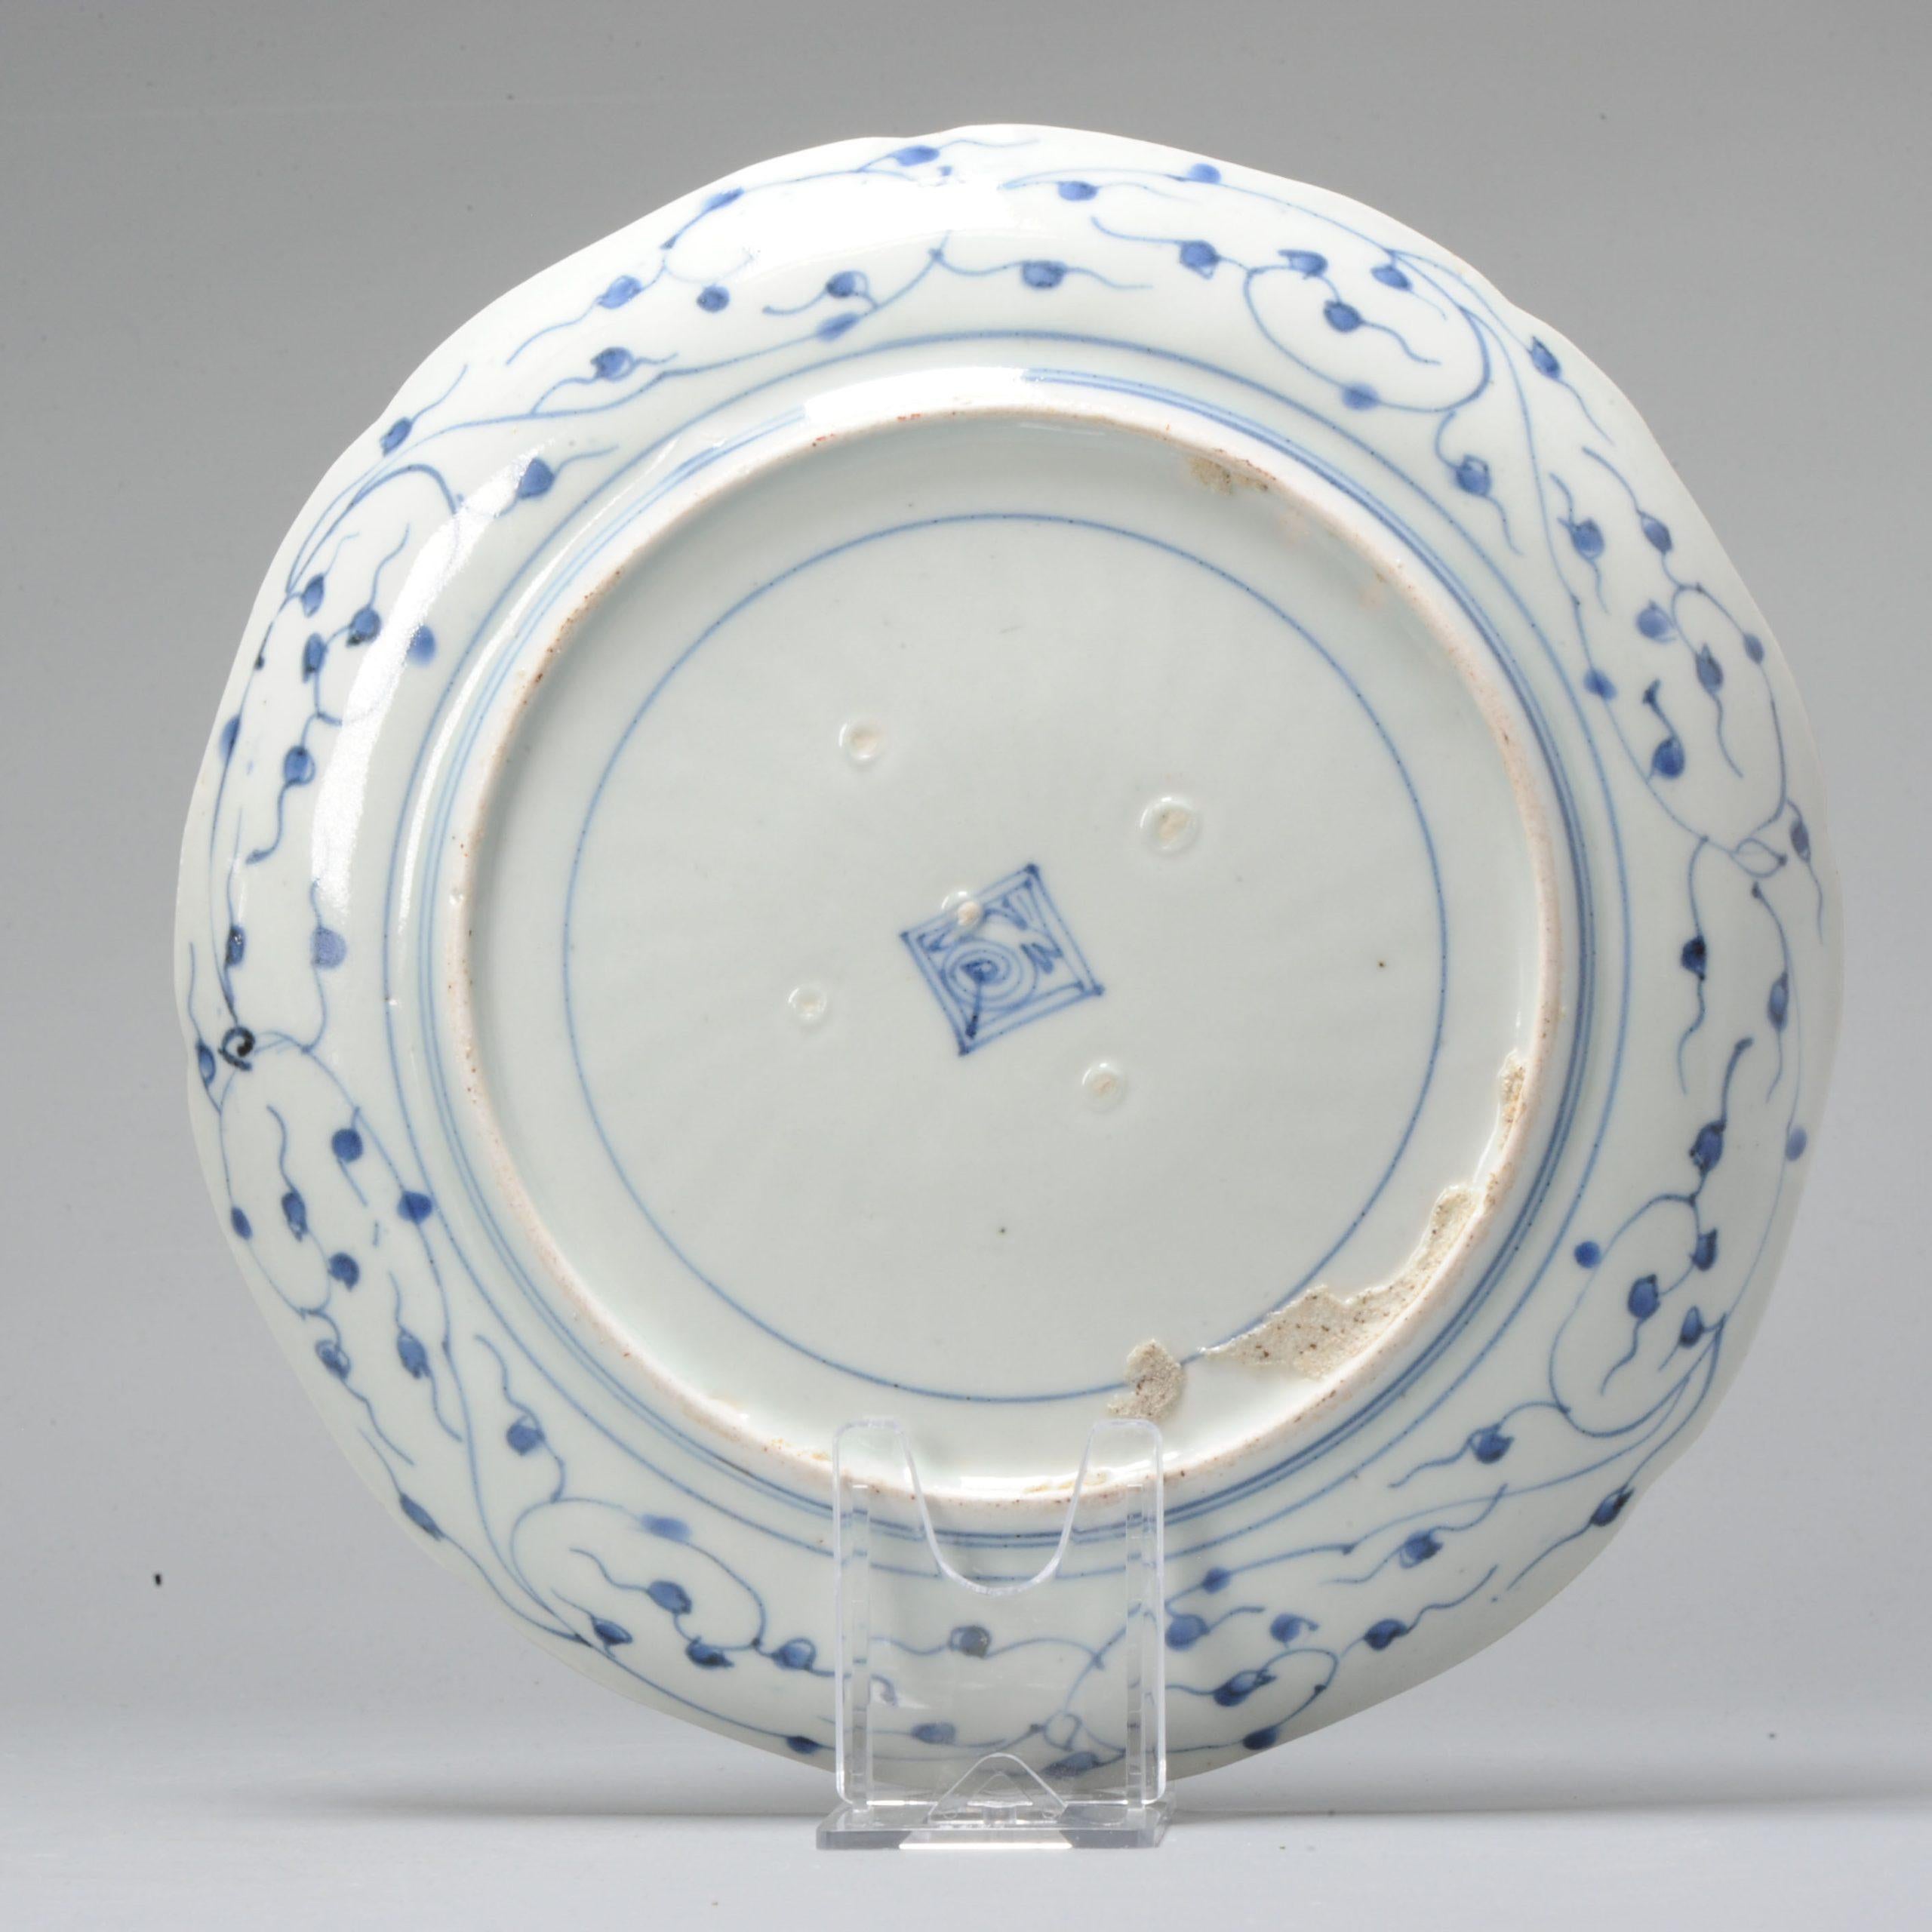 18th Century and Earlier Edo Period 17/18C Japanese Porcelain Dish Polychrome Kakiemon or Arita with Fuku For Sale